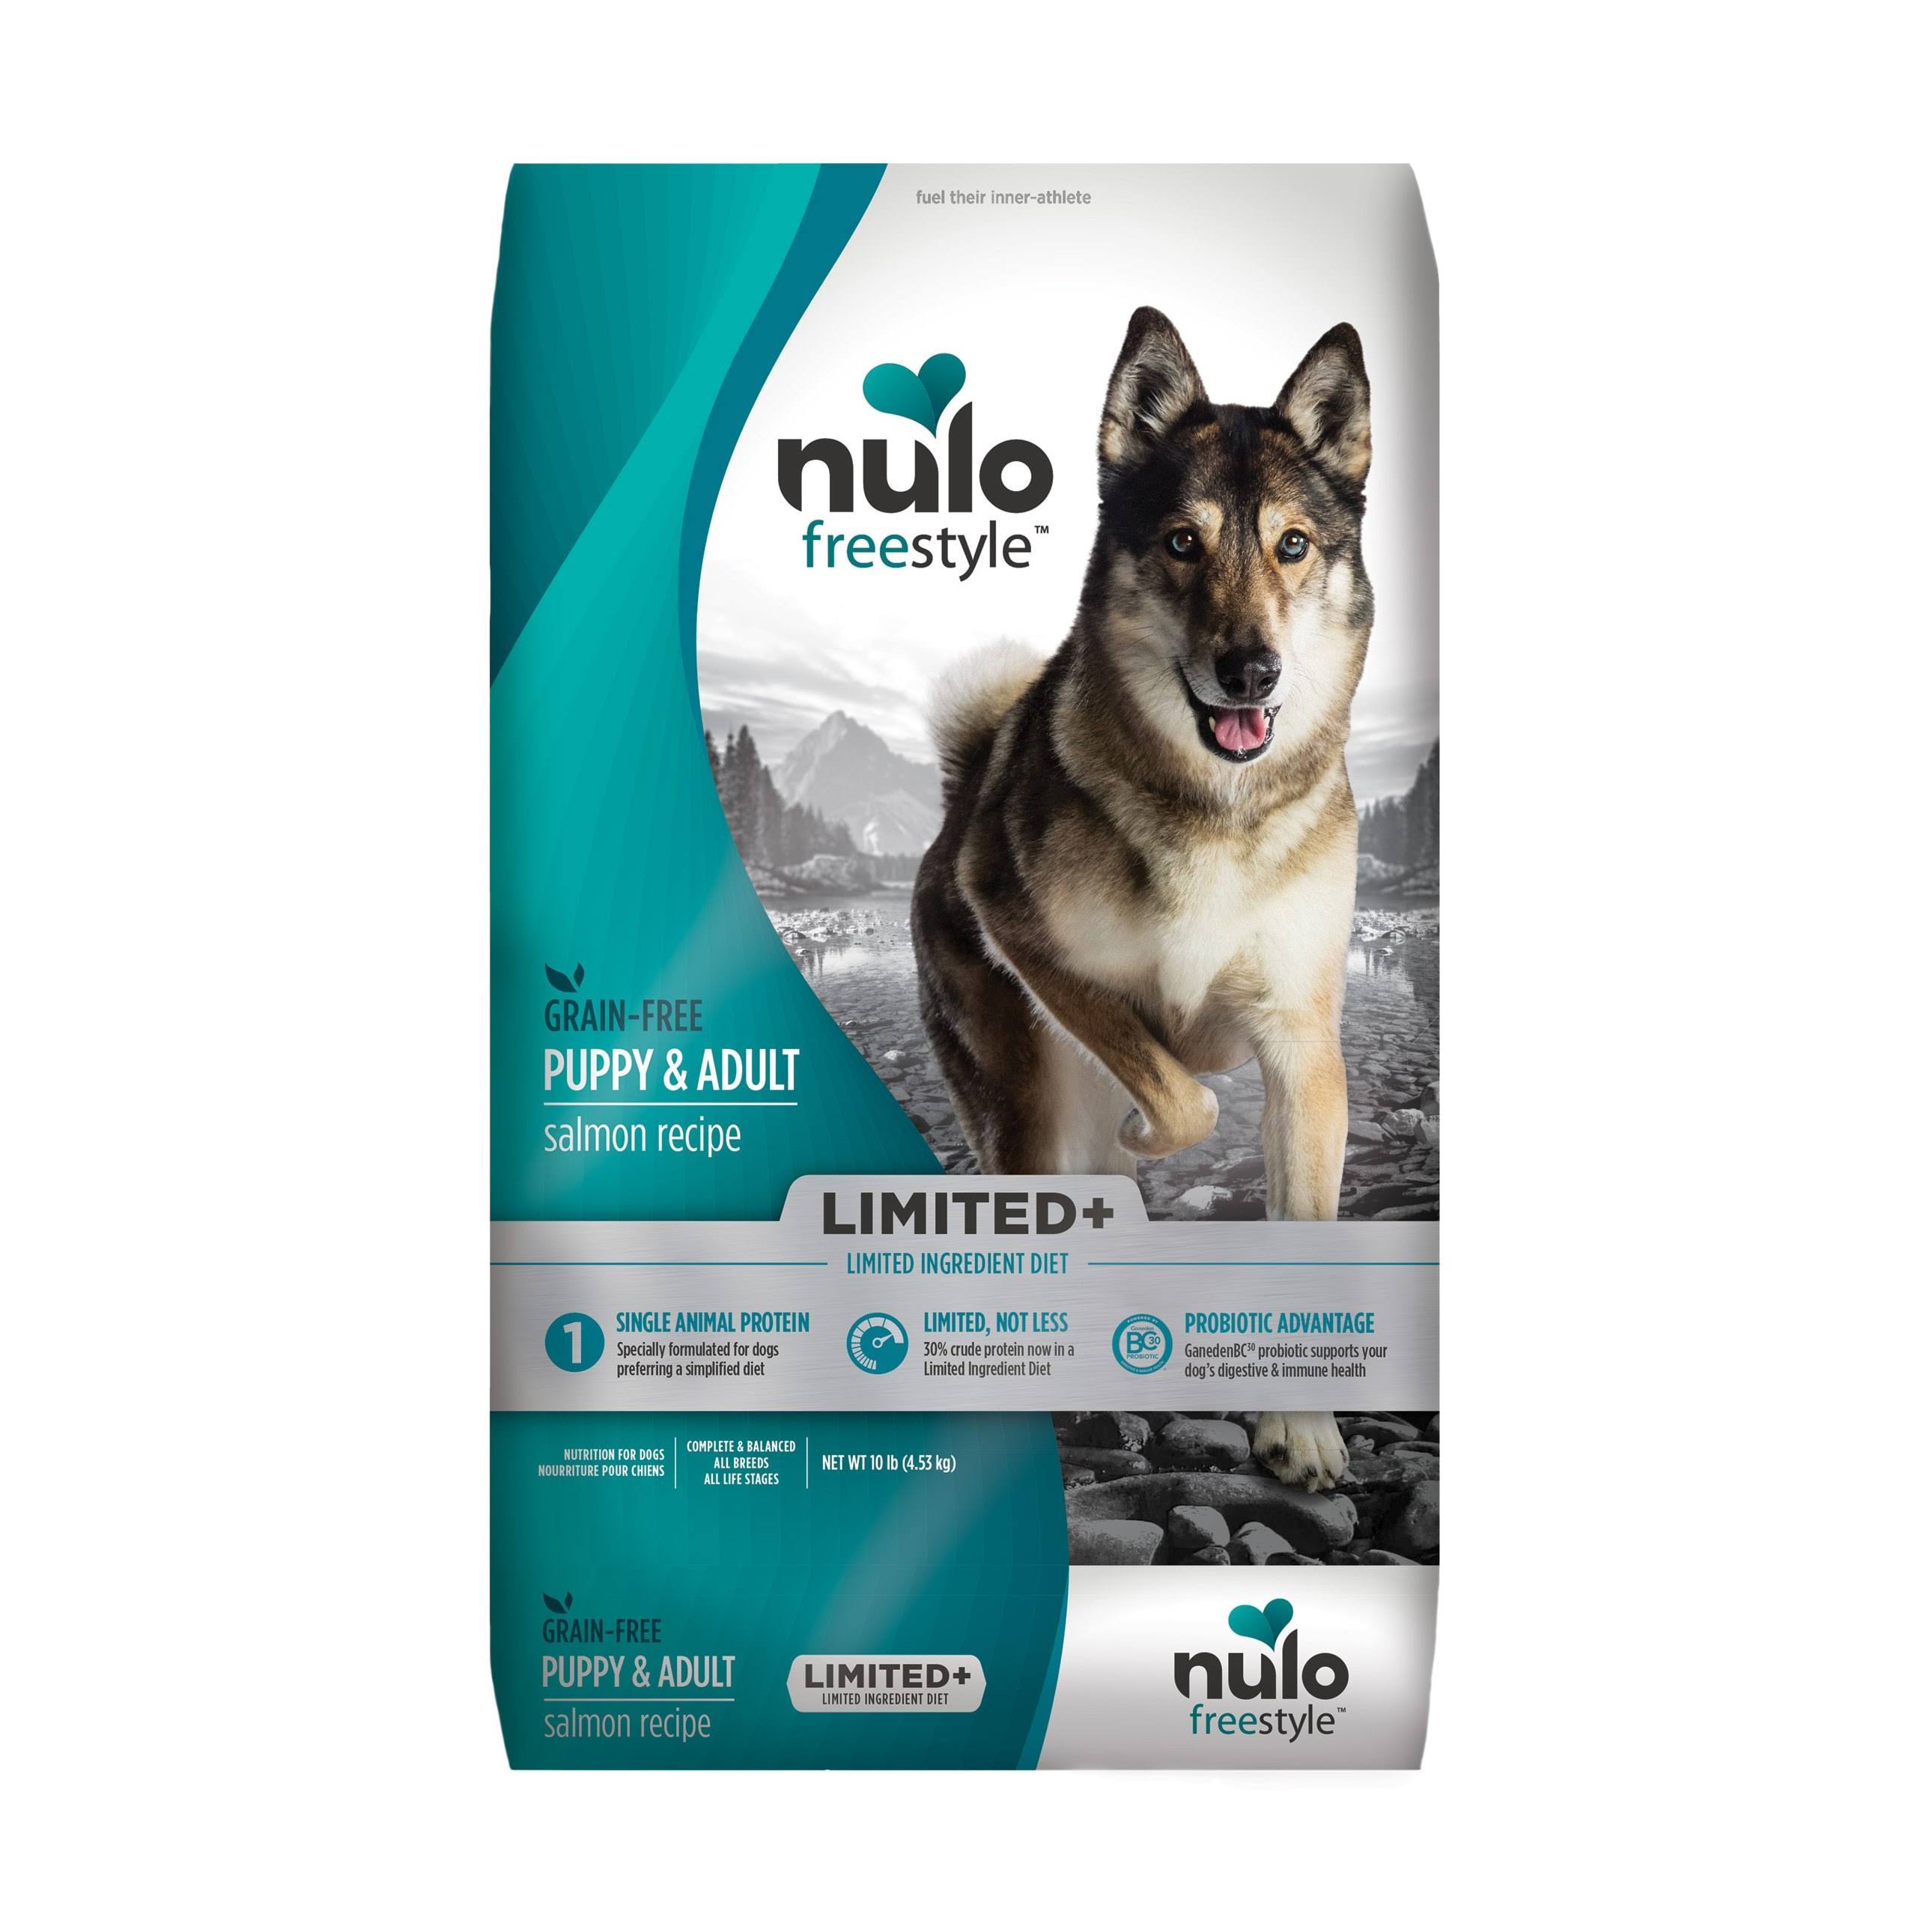 Nulo Freestyle Limited+ Grain Free Salmon Dry Dog Food 10 lbs